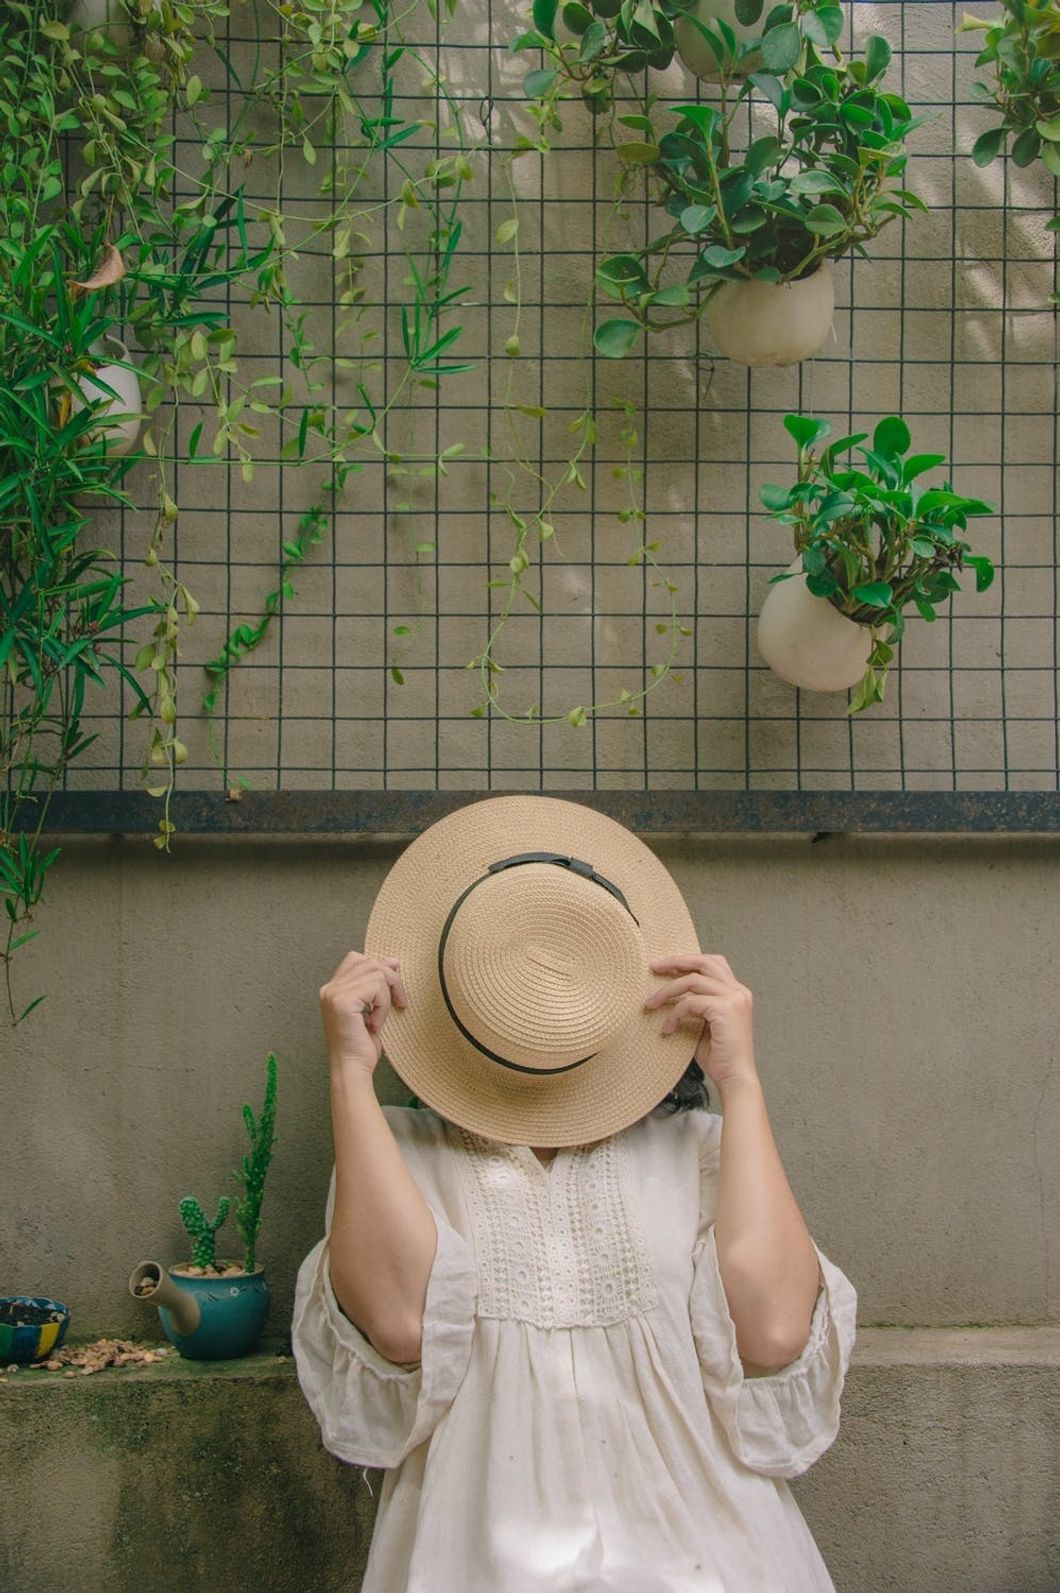 https://www.pexels.com/photo/person-wearing-white-elbow-sleeved-top-covering-beige-sun-hat-1076583/